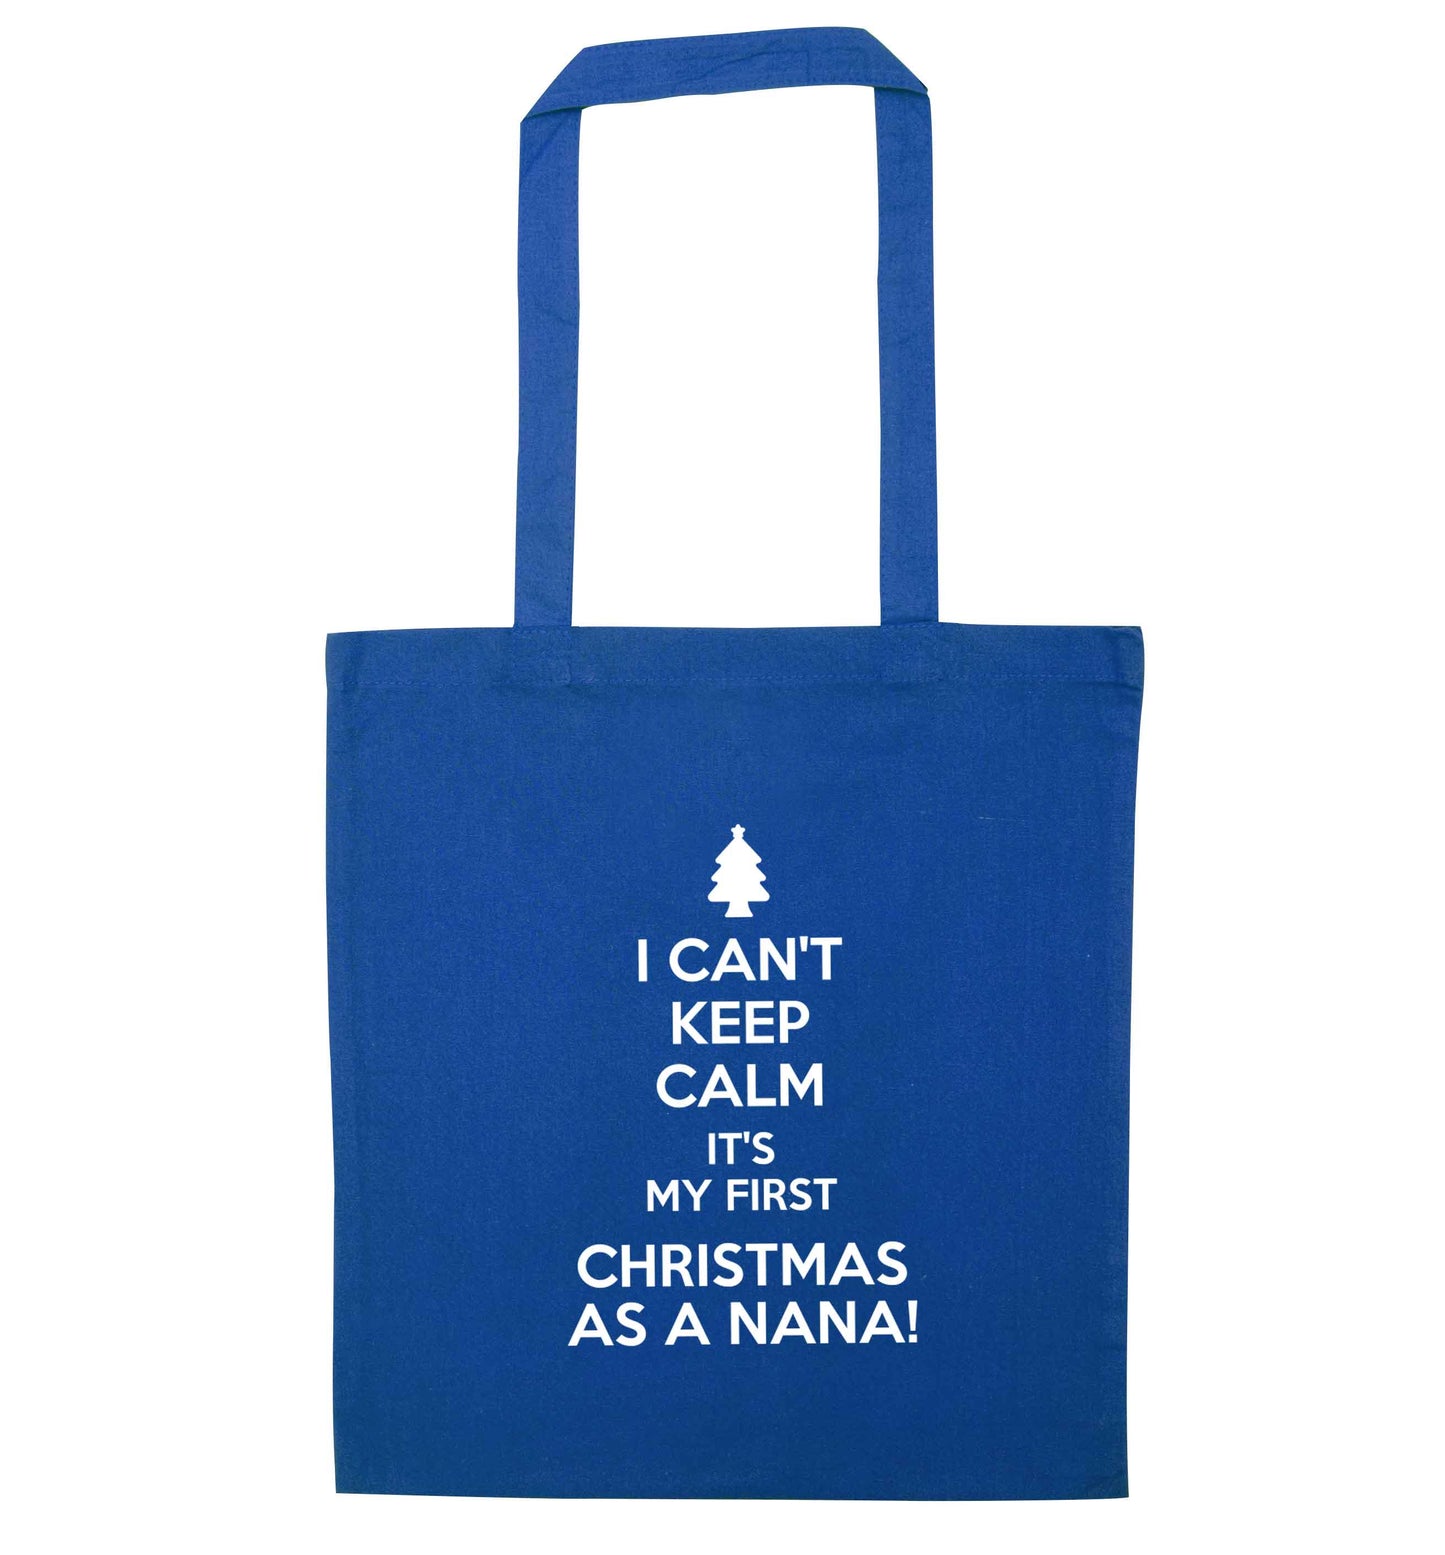 I can't keep calm it's my first Christmas as a nana! blue tote bag